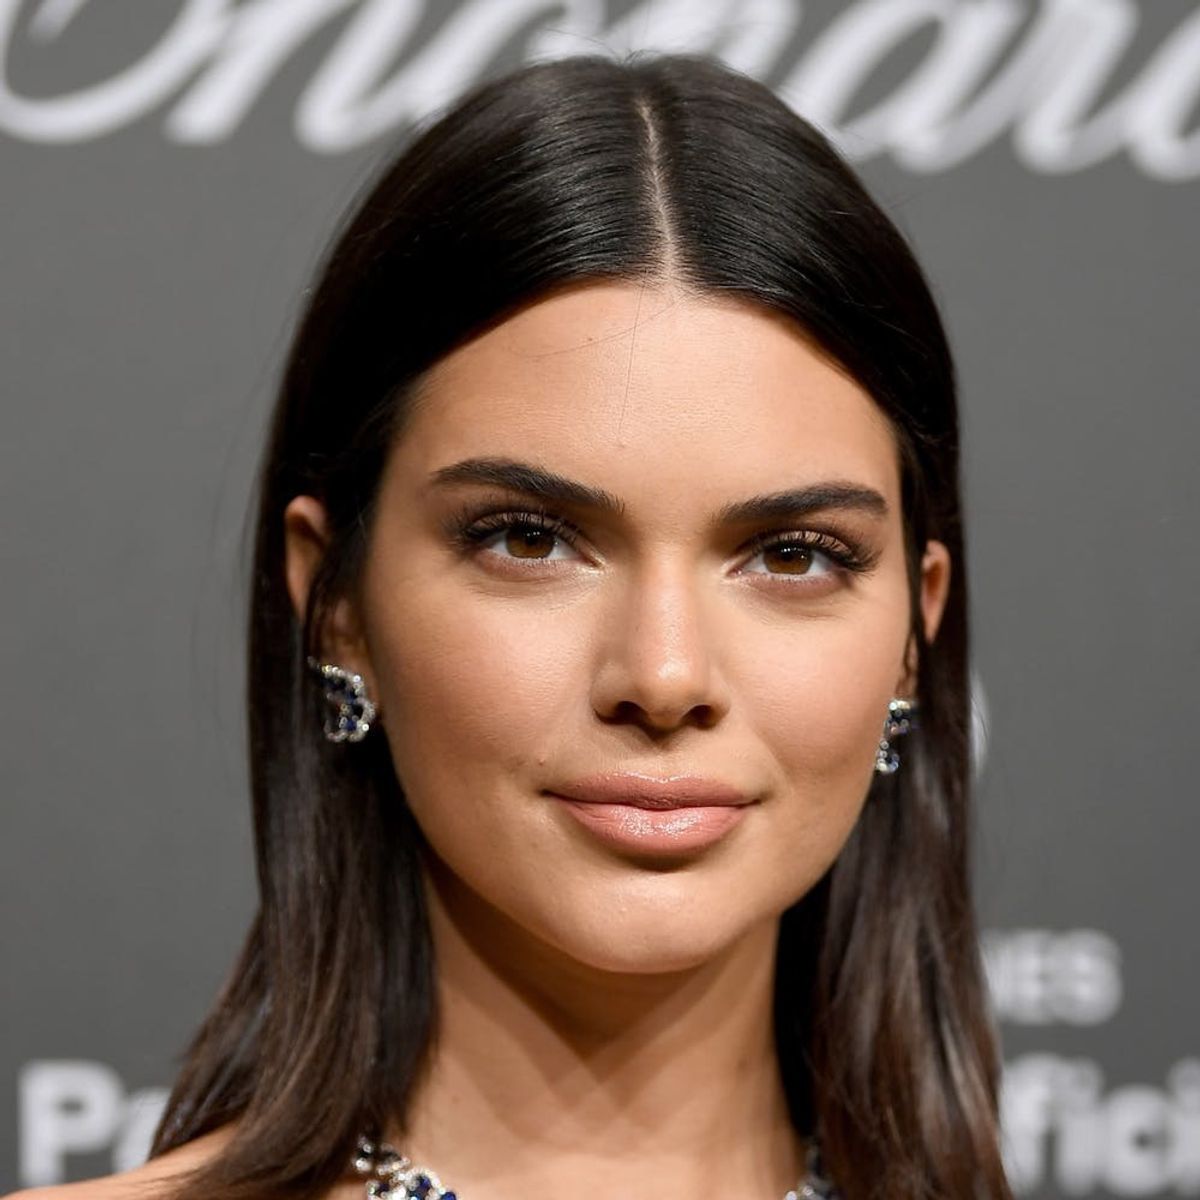 Kendall Jenner Has Some Words for Caitlyn Jenner About How She Painted the Kardashians in Her Memoir